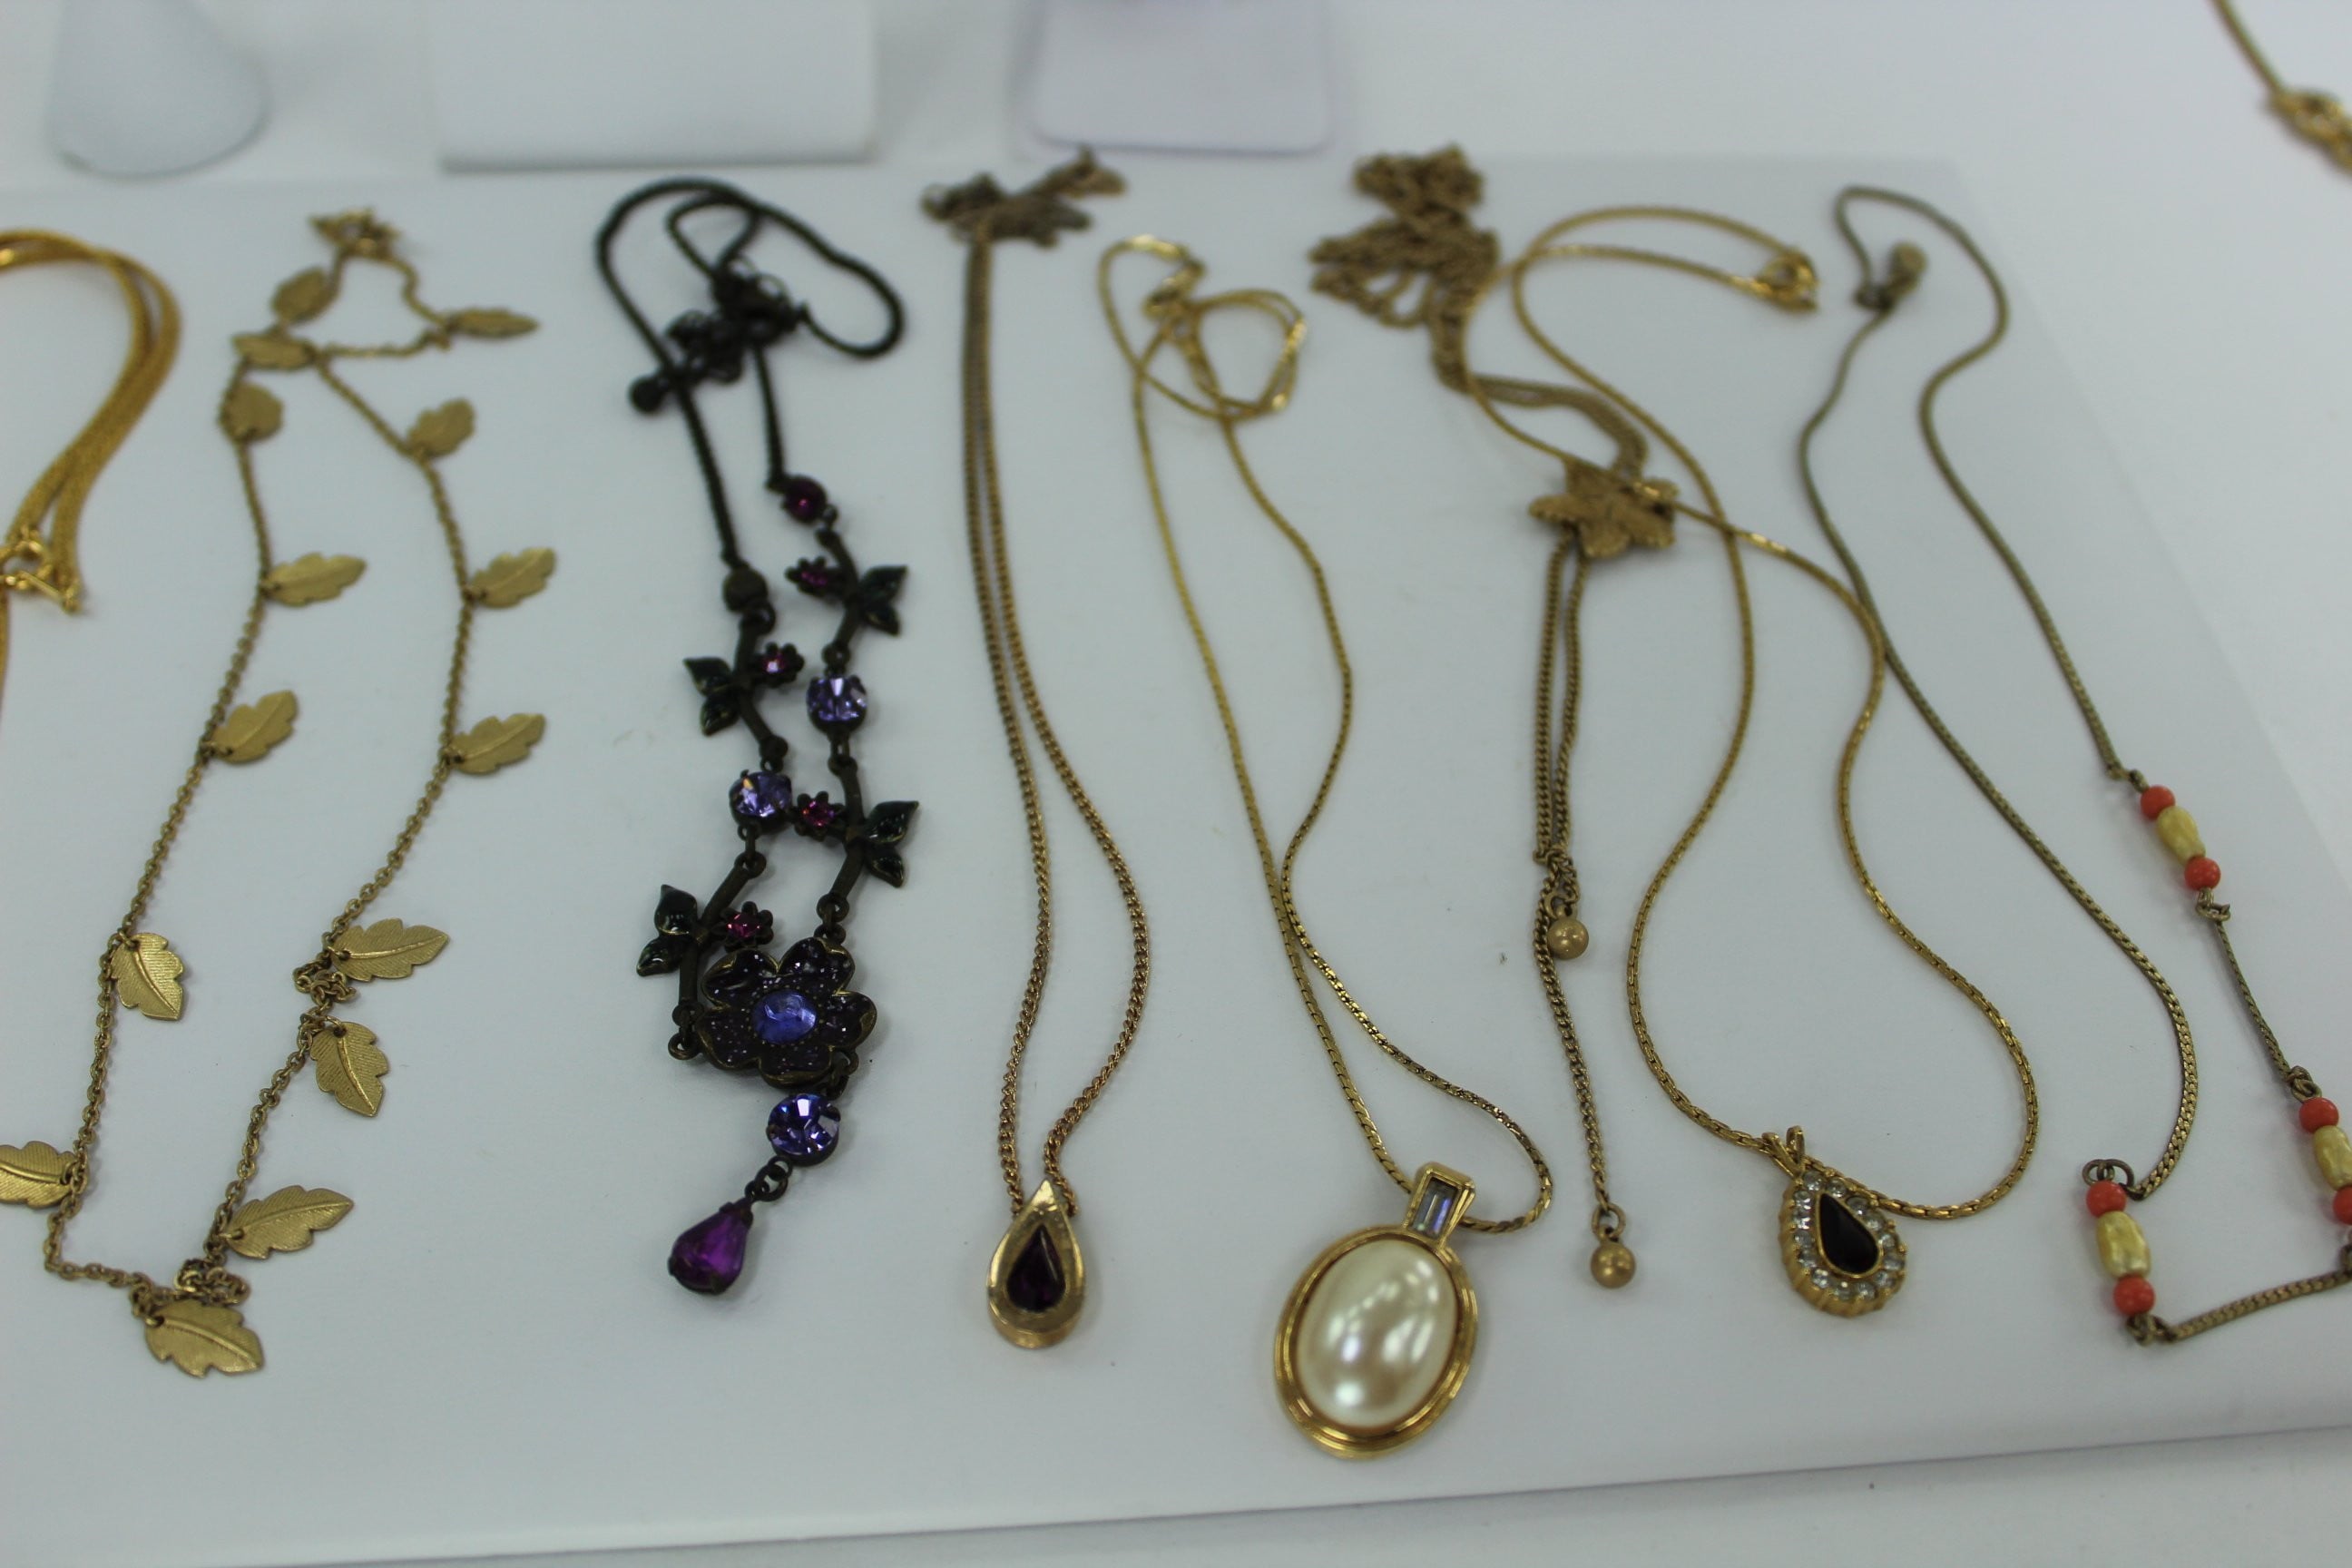 Misc. Assorted Jewelry Necklaces, Bracelets, Ring, Pins Claire's, Avon,  Express | eBay